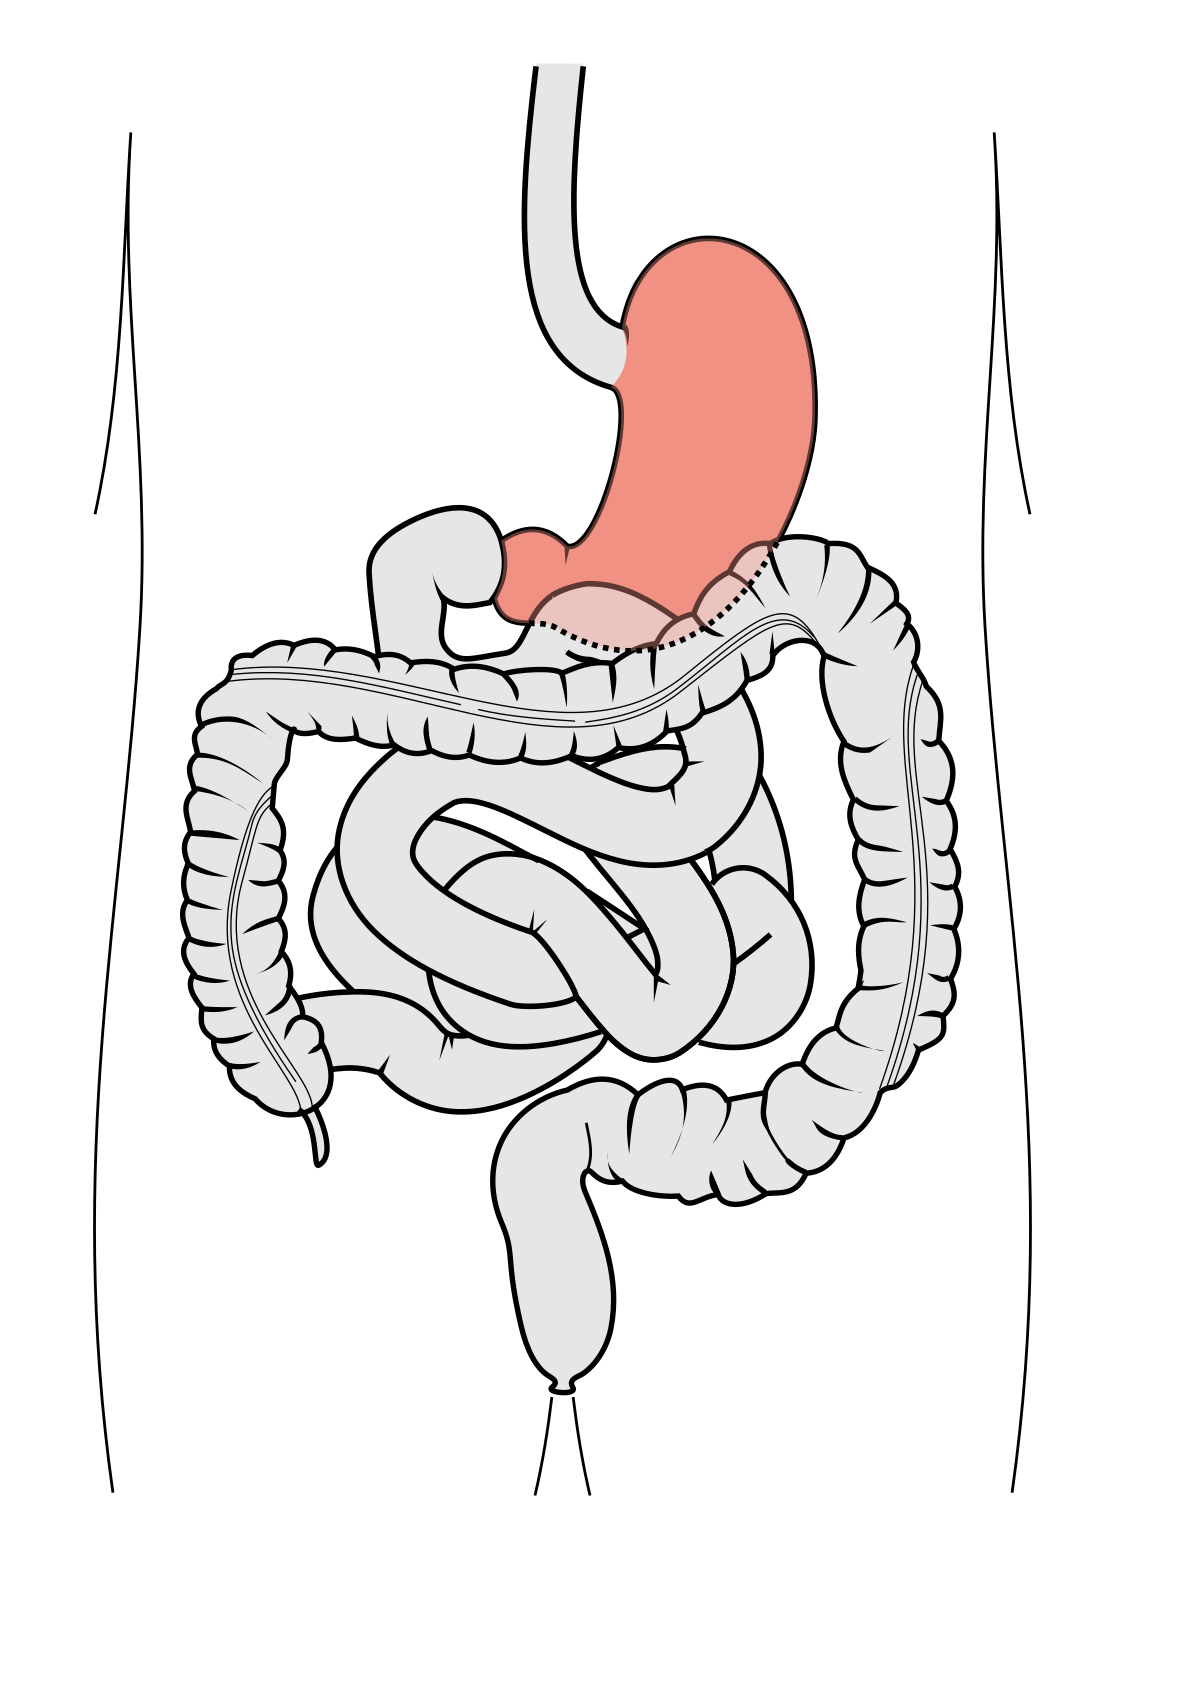 File:Abdominal Quadrant Regions es cleaned.svg - Wikimedia Commons